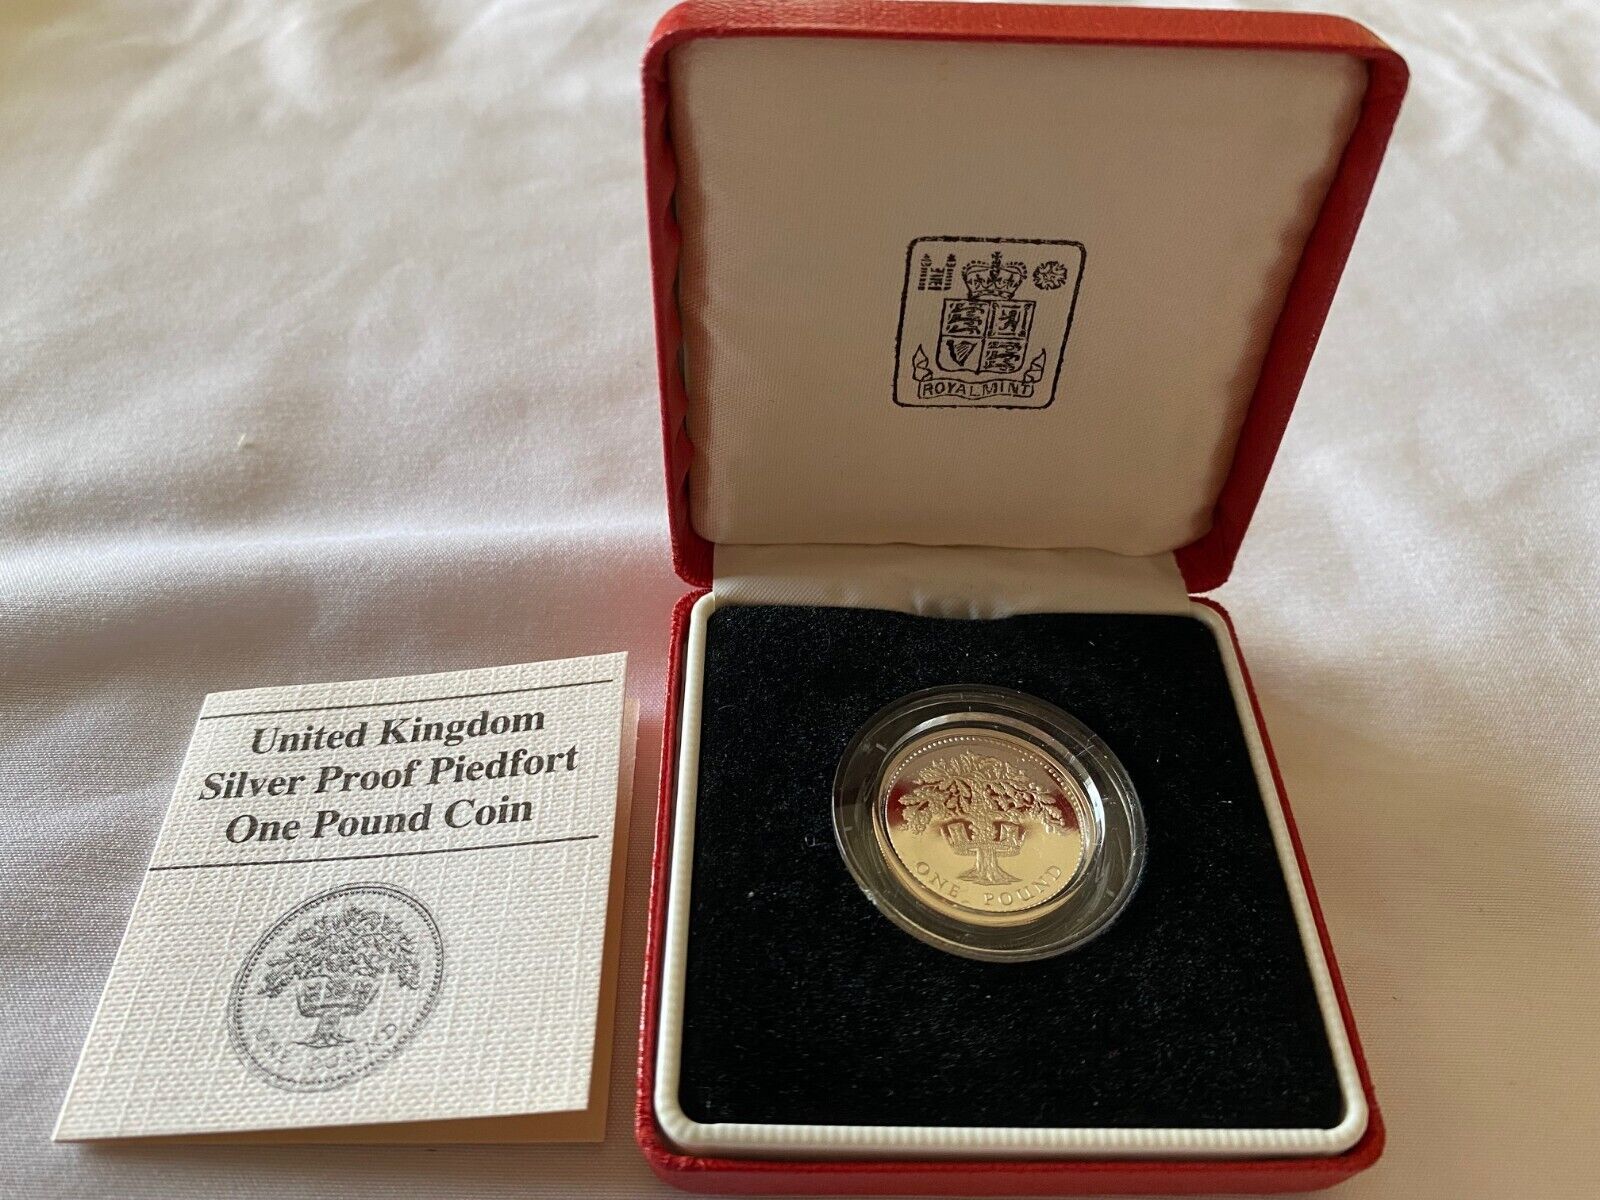 1987 UNITED KINGDOM Silver Proof Piedfort One Pound Coin With Box & COA